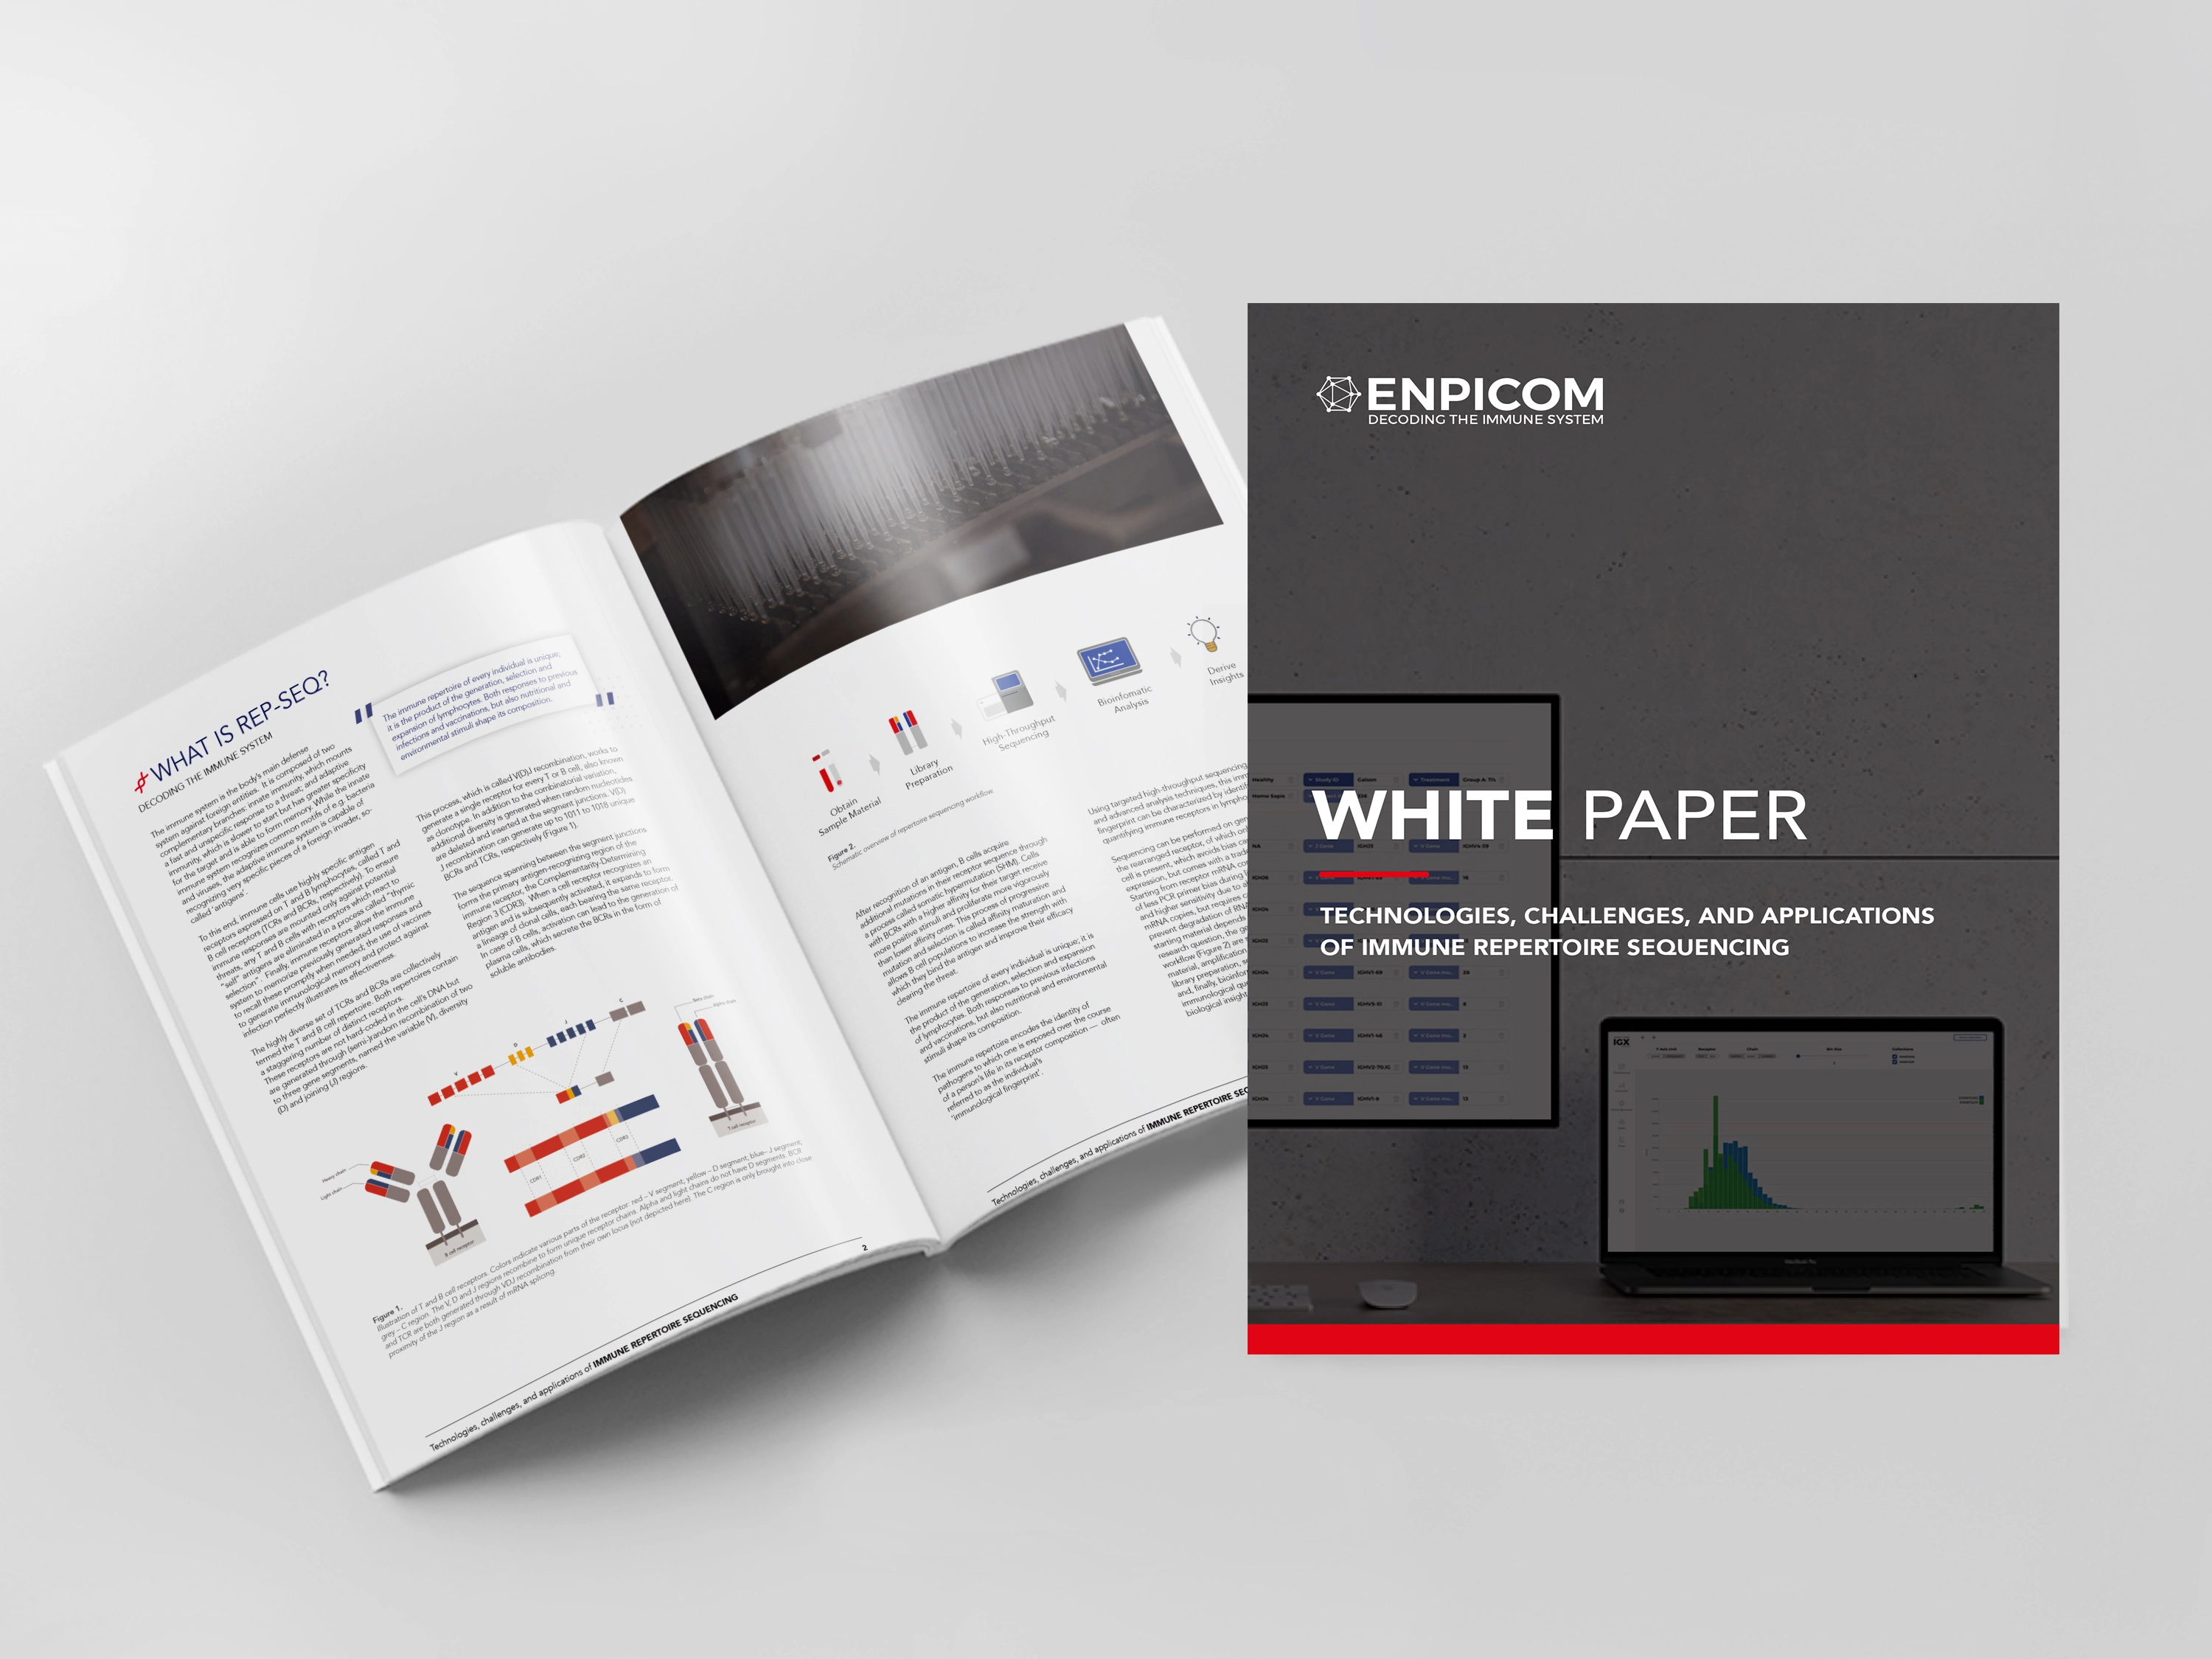 ENPICOM's white paper: Technologies, challenges, and applications of immune repertoire sequencing.